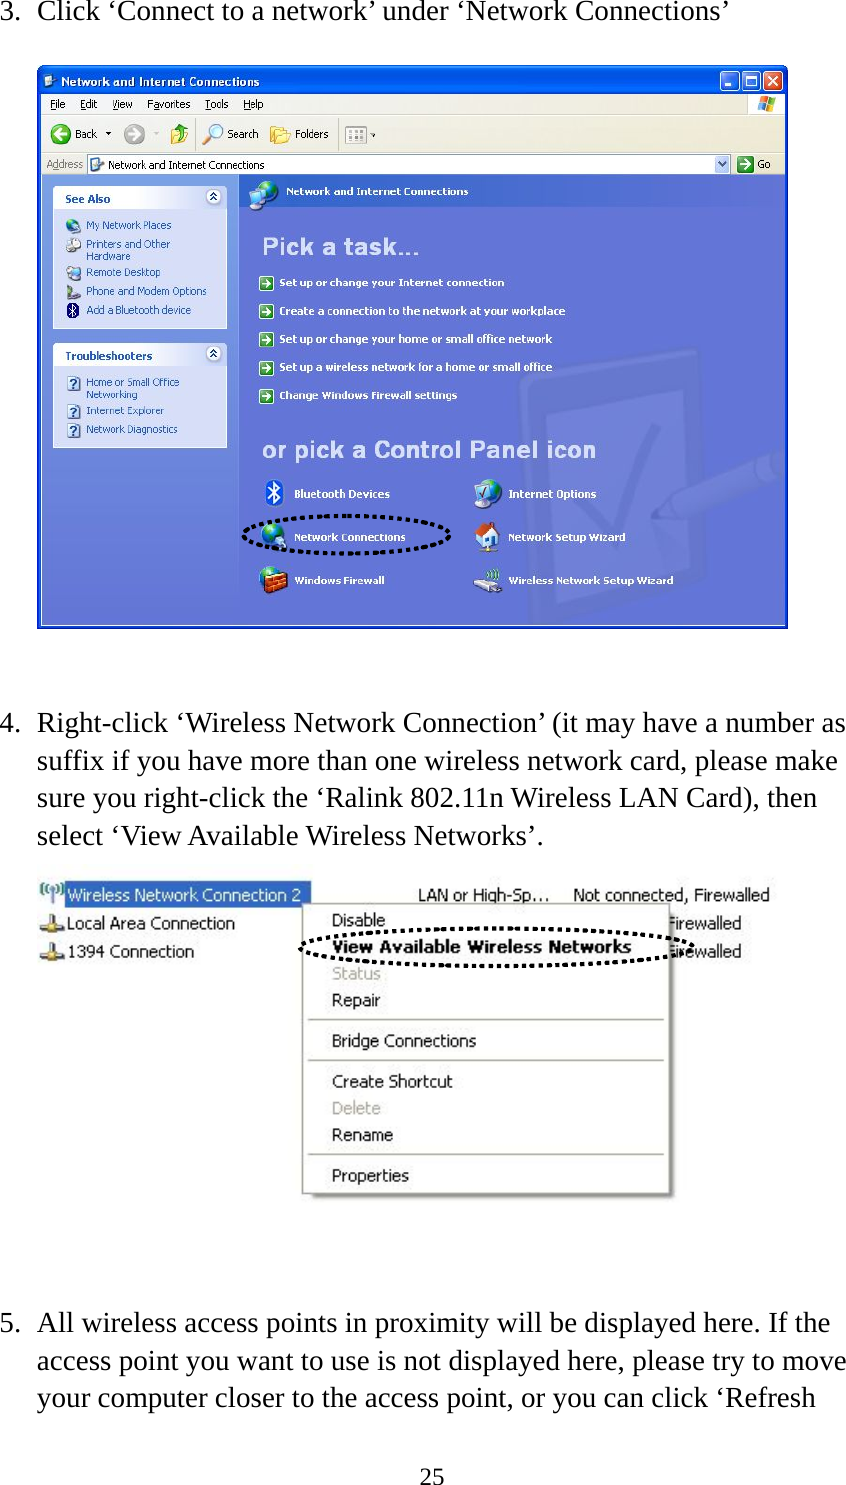  253. Click ‘Connect to a network’ under ‘Network Connections’     4. Right-click ‘Wireless Network Connection’ (it may have a number as suffix if you have more than one wireless network card, please make sure you right-click the ‘Ralink 802.11n Wireless LAN Card), then select ‘View Available Wireless Networks’.    5. All wireless access points in proximity will be displayed here. If the access point you want to use is not displayed here, please try to move your computer closer to the access point, or you can click ‘Refresh 